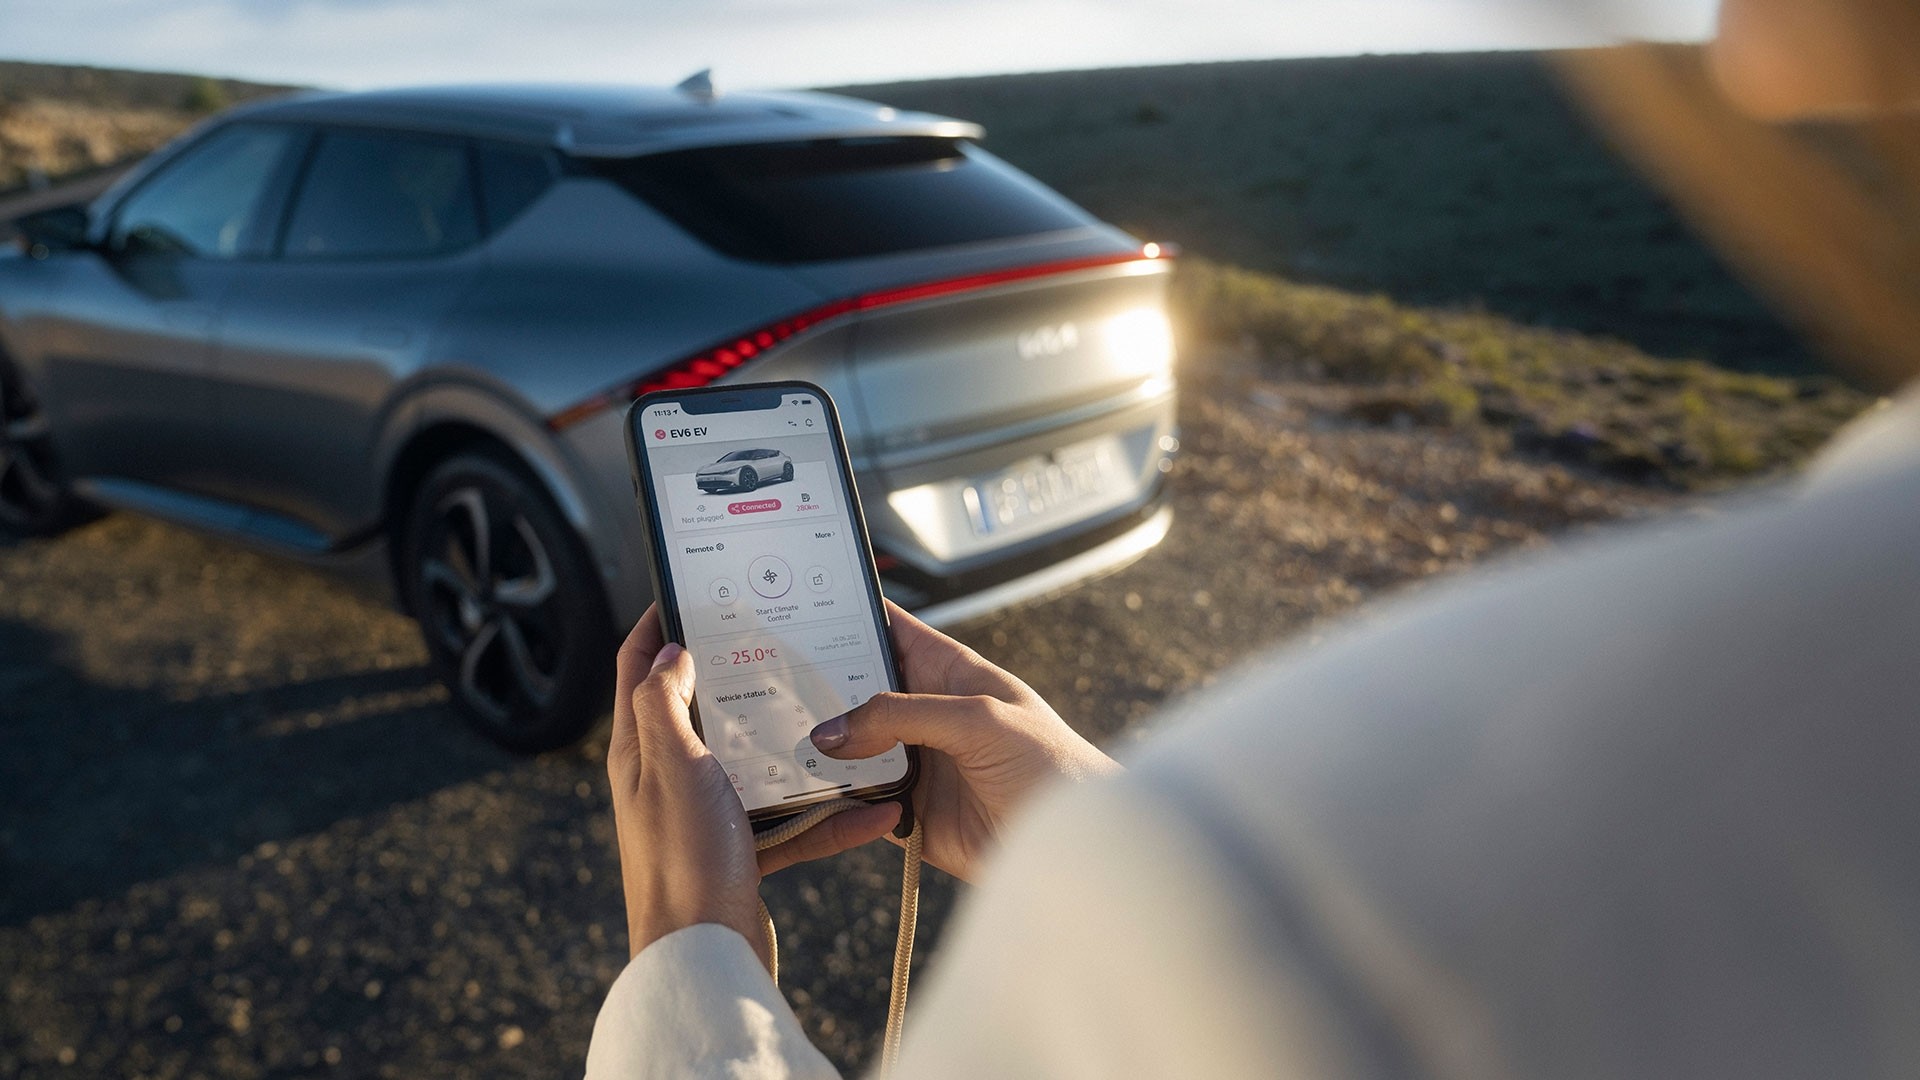 Kia Rebrands UVO Connect System as Kia Connect, App Available for Both